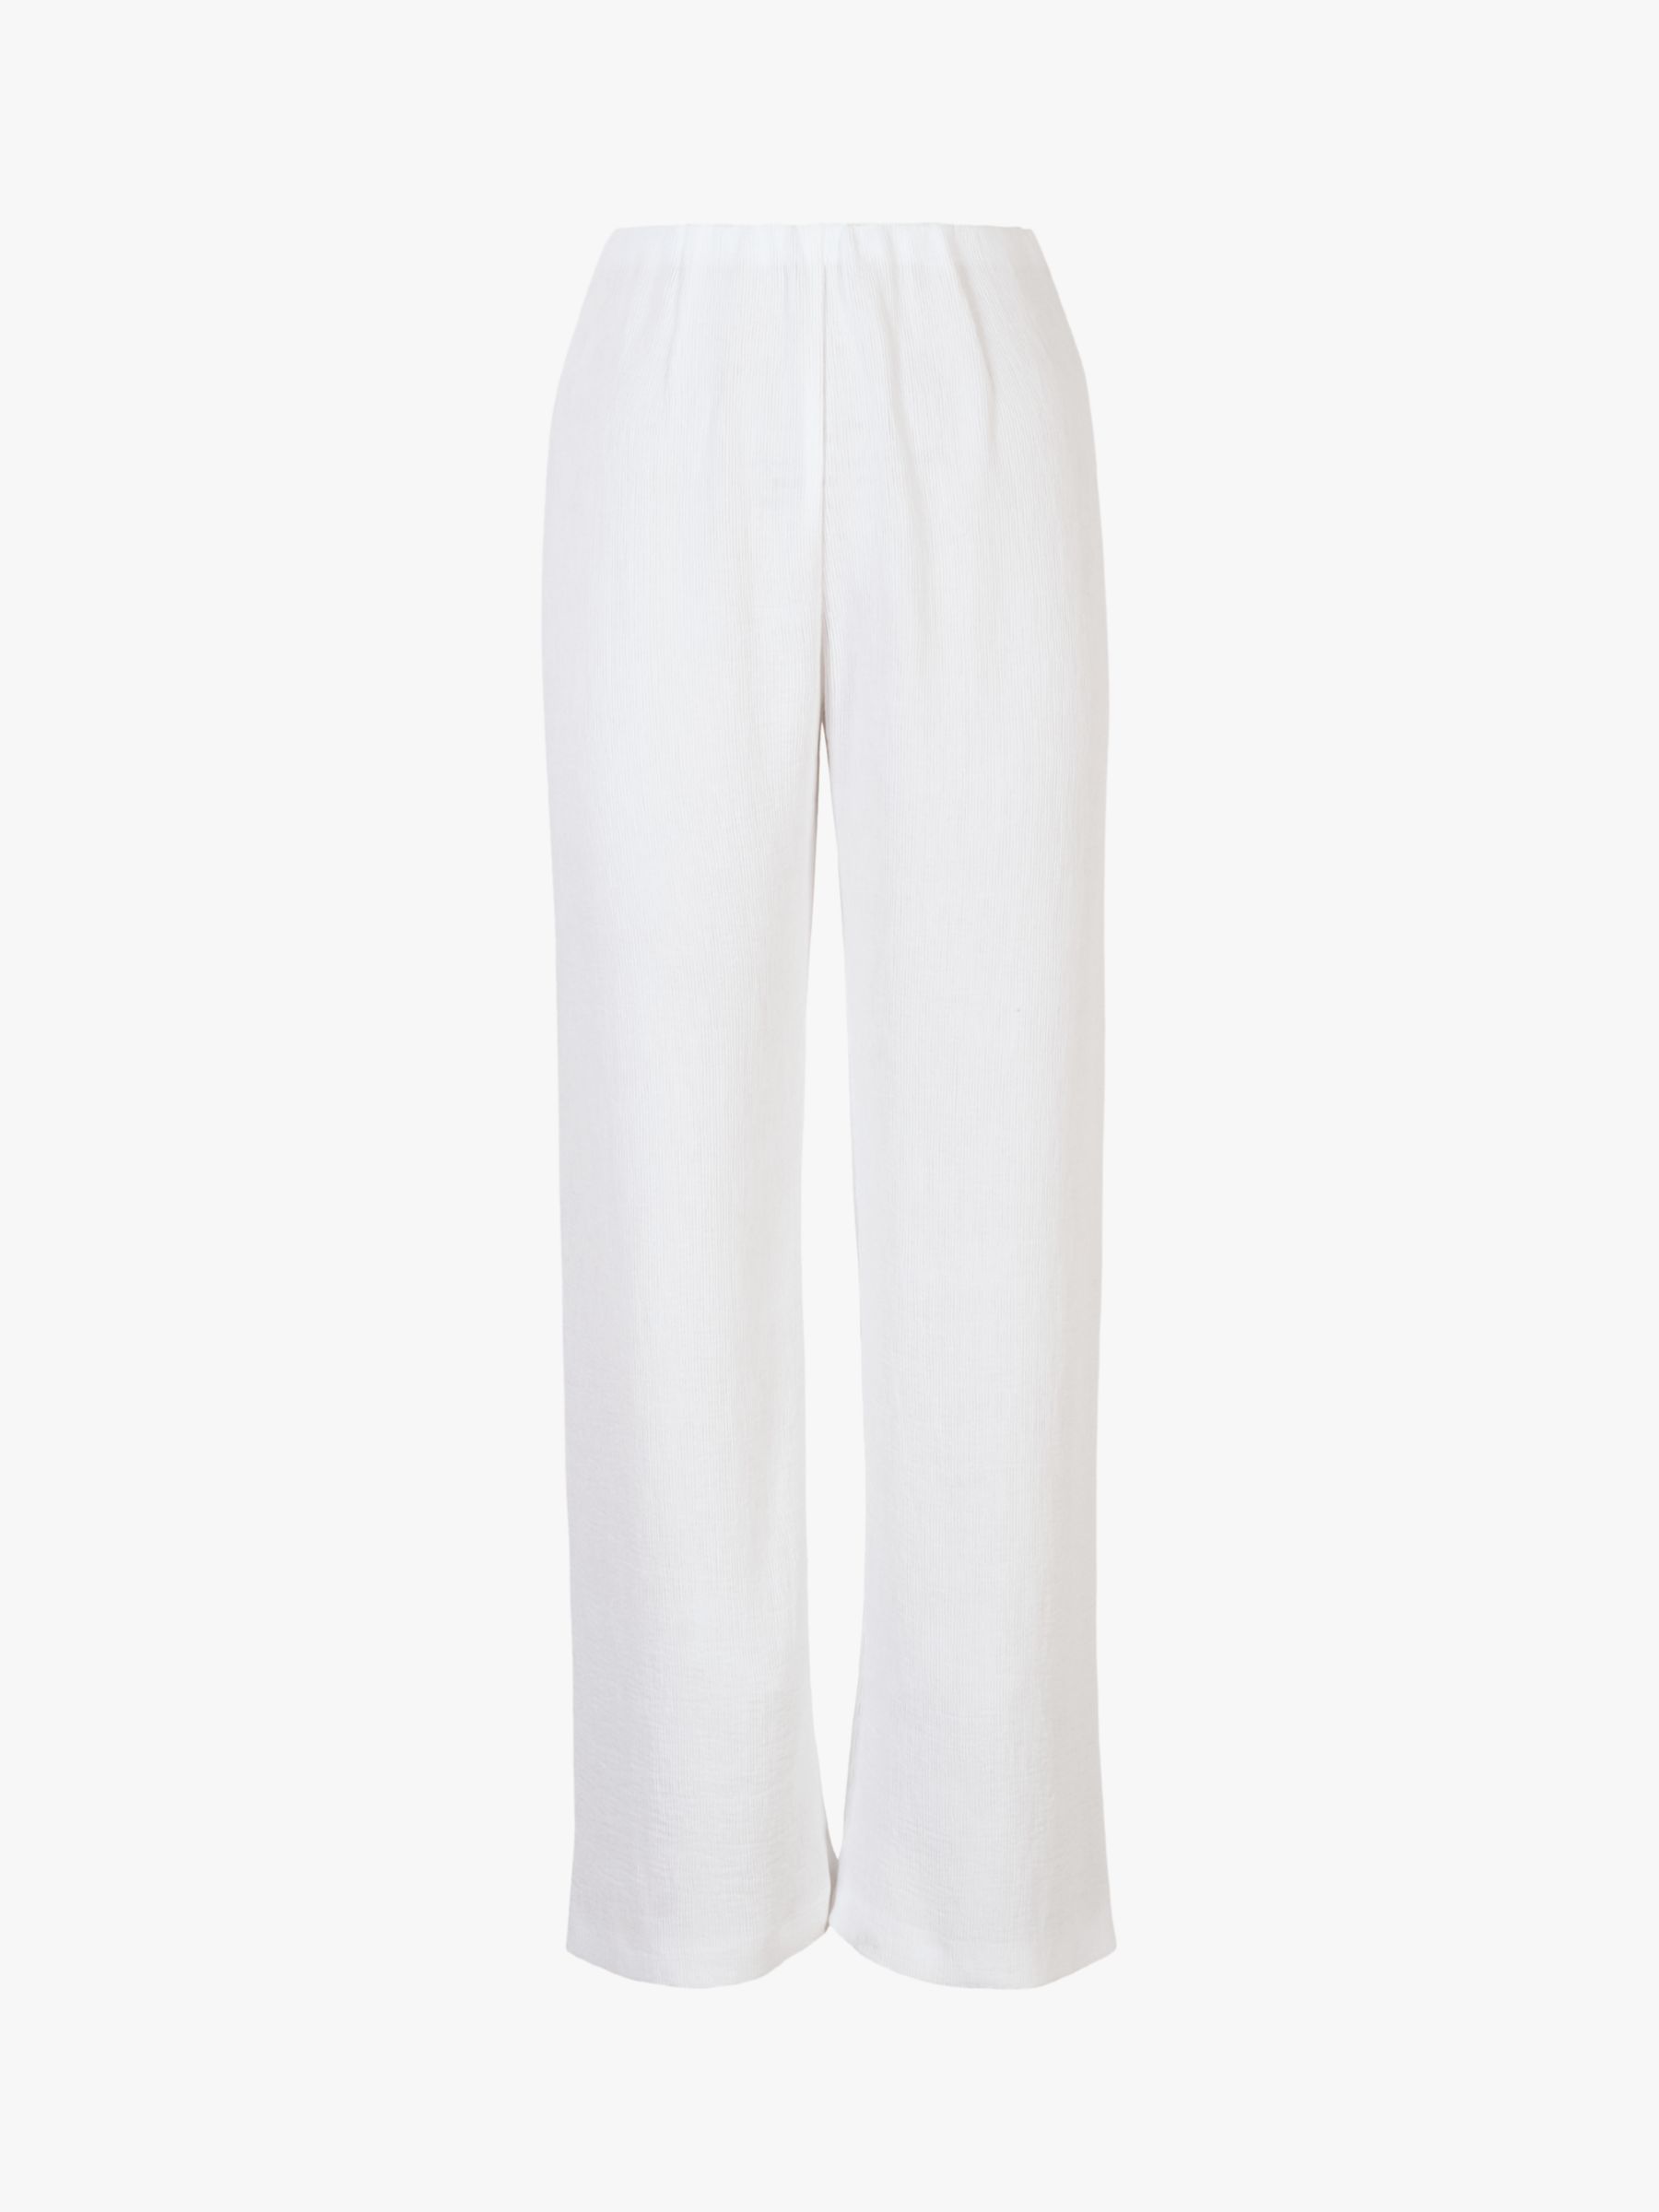 chesca Fine Crinkle Trousers, White at John Lewis & Partners